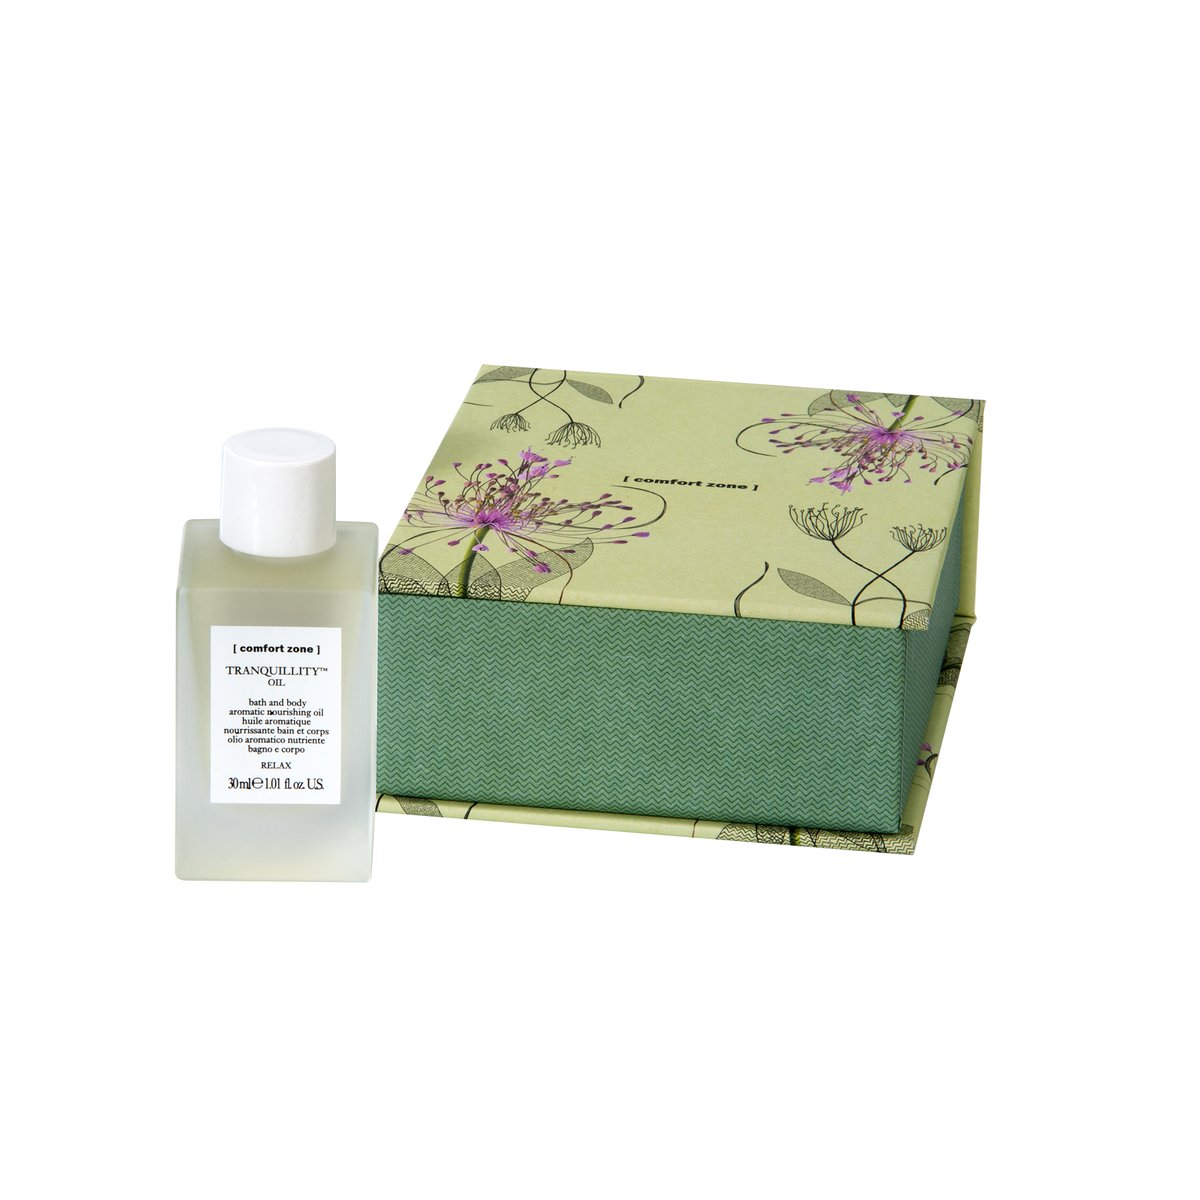 TRANQUILLITY BATH AND BODY OIL 30 ML